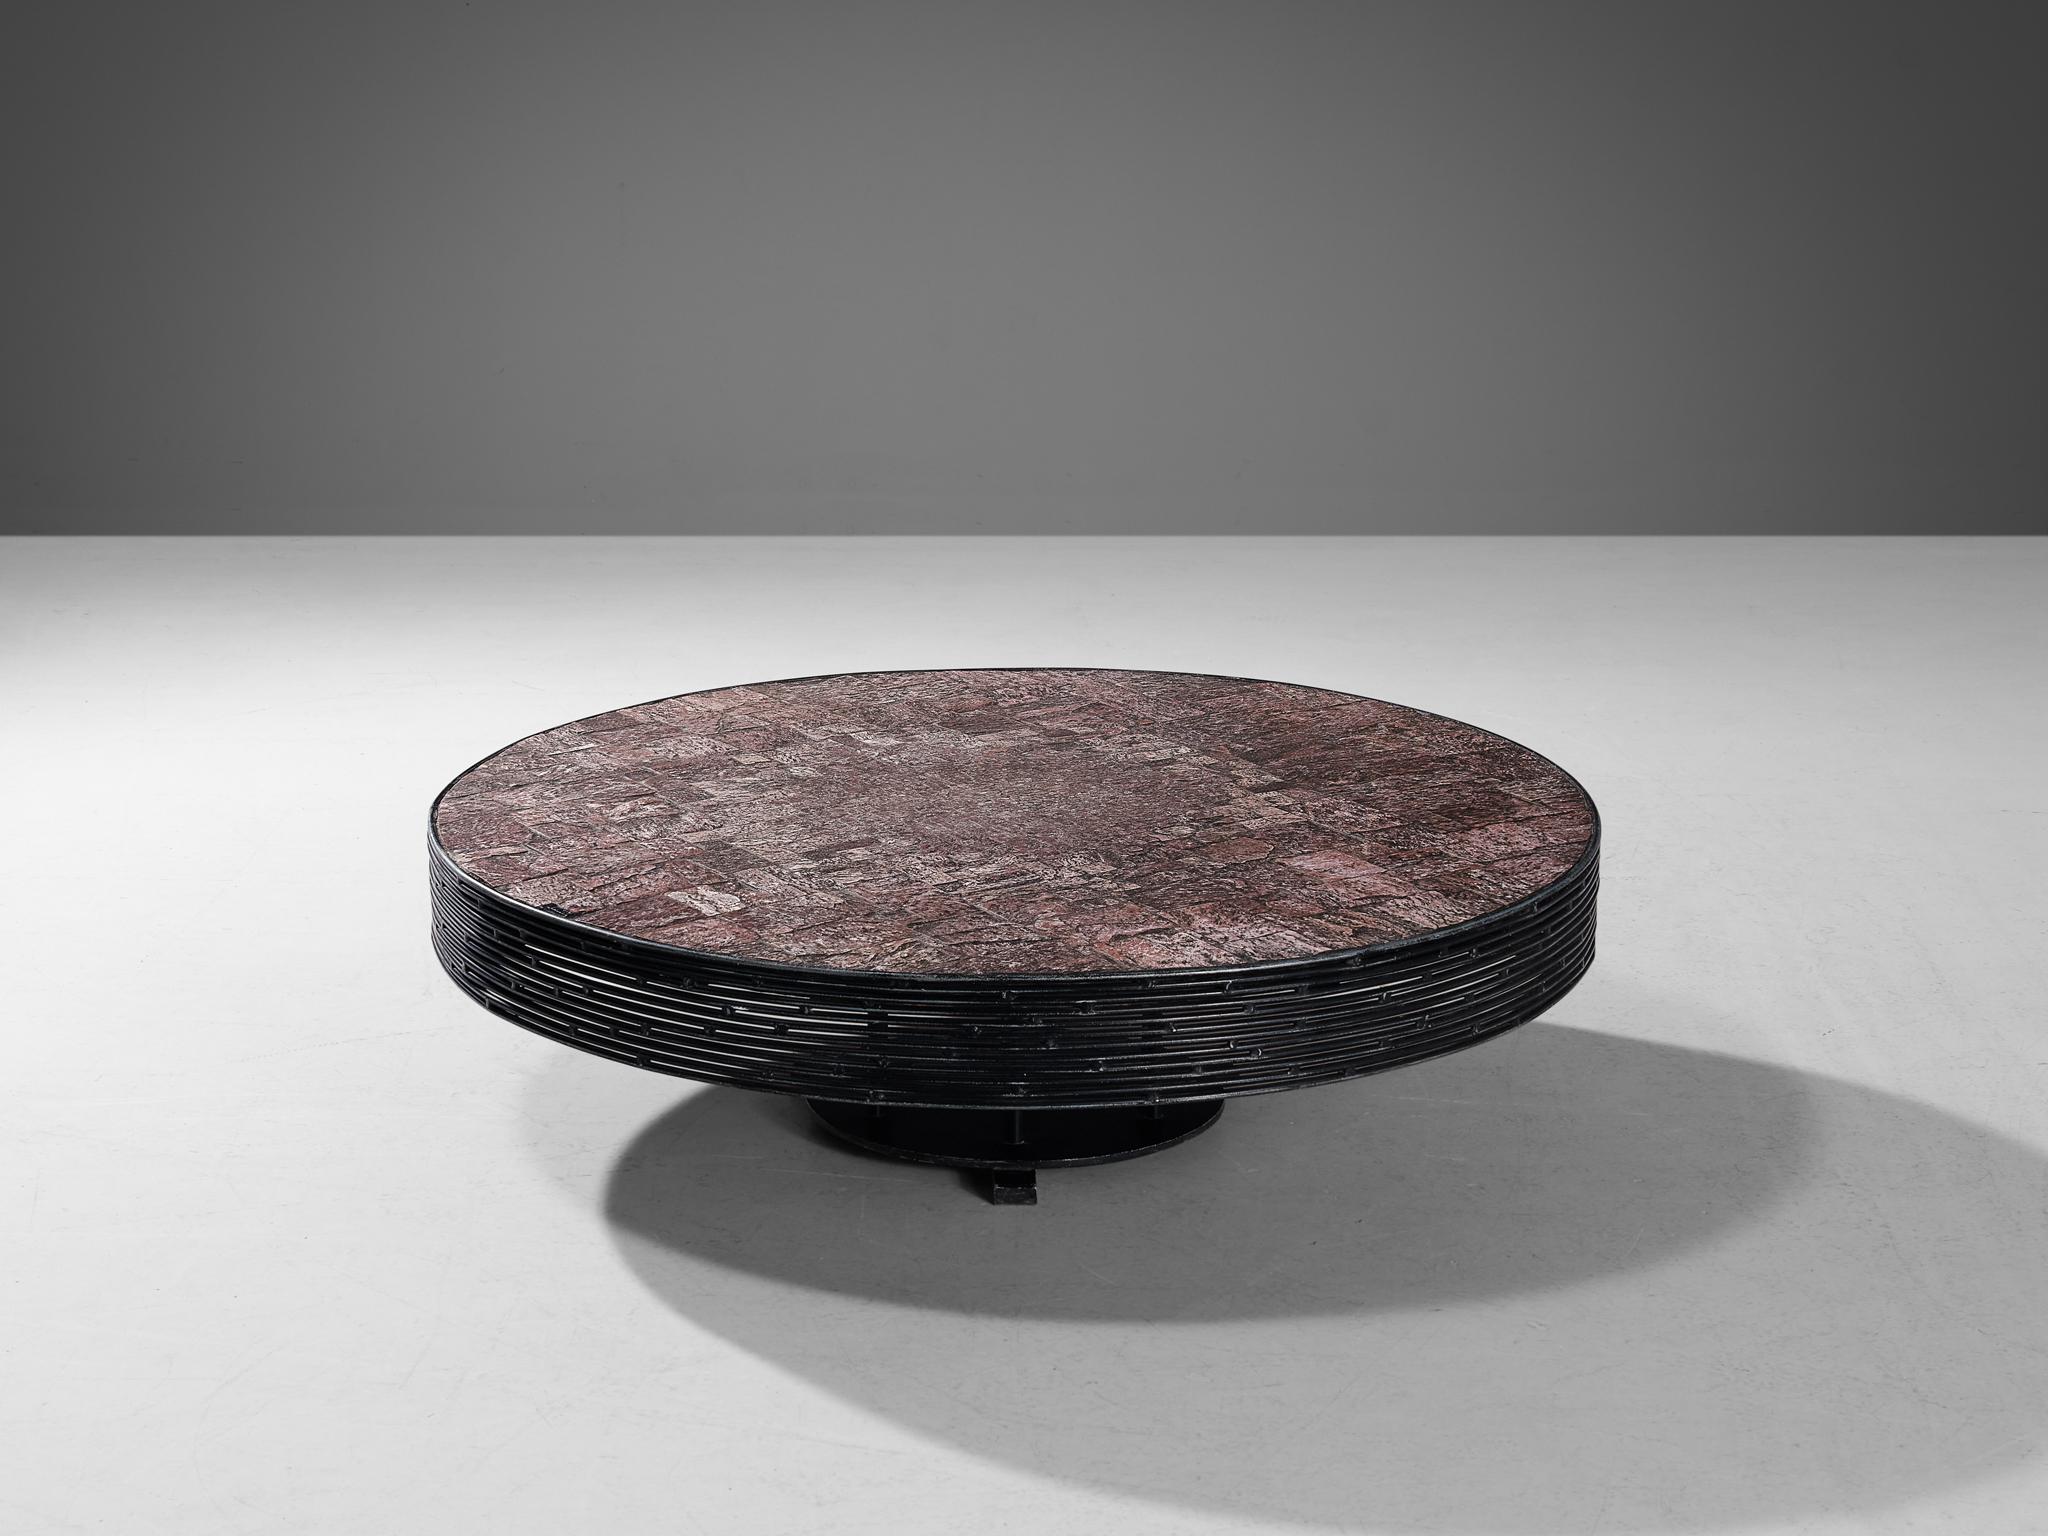 Pia Manu, coffee table, metal, quartz, Belgium, 1965.

This unique, hand made piece is designed in the workshop of Pia Manu. Due to the artistic use of materials and texture combinations, the coffee table has a strong decorative character and hits